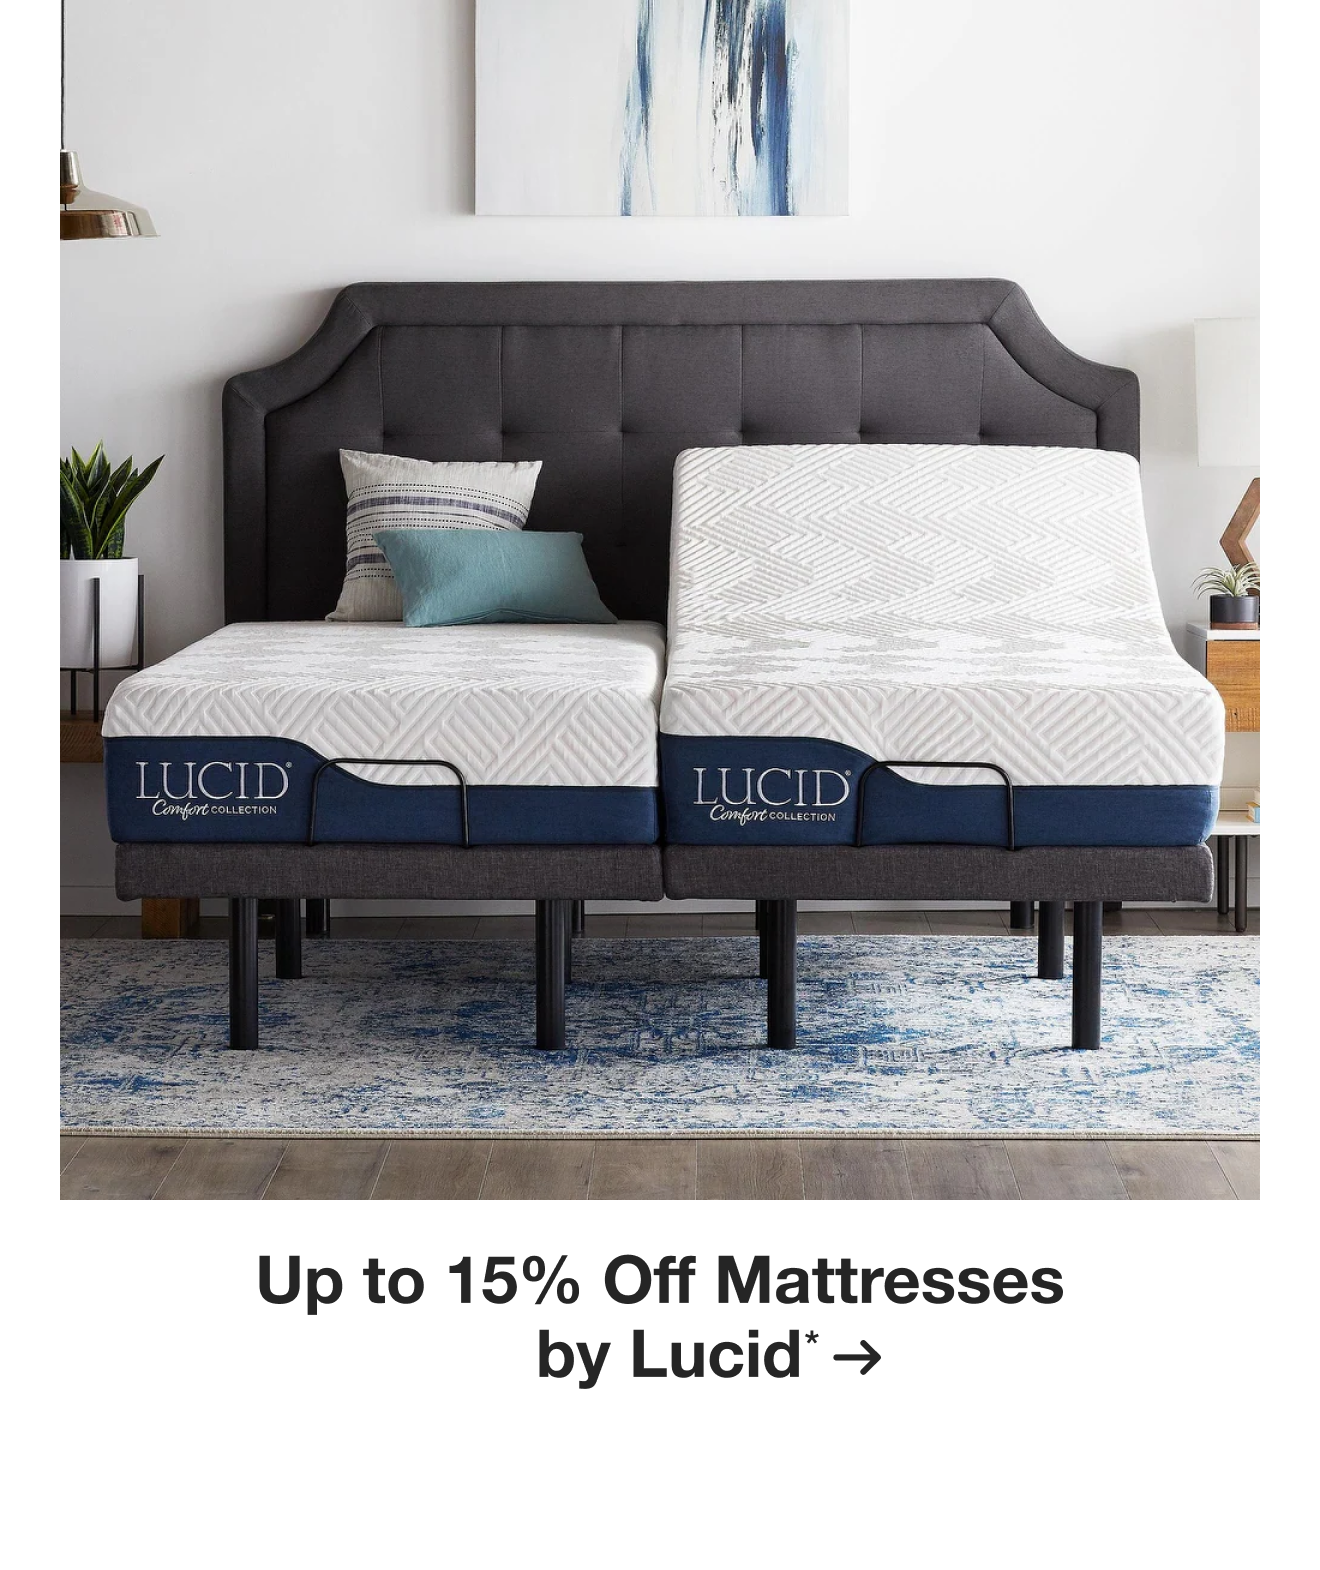 Up to 15% Off Select Mattresses by Lucid*